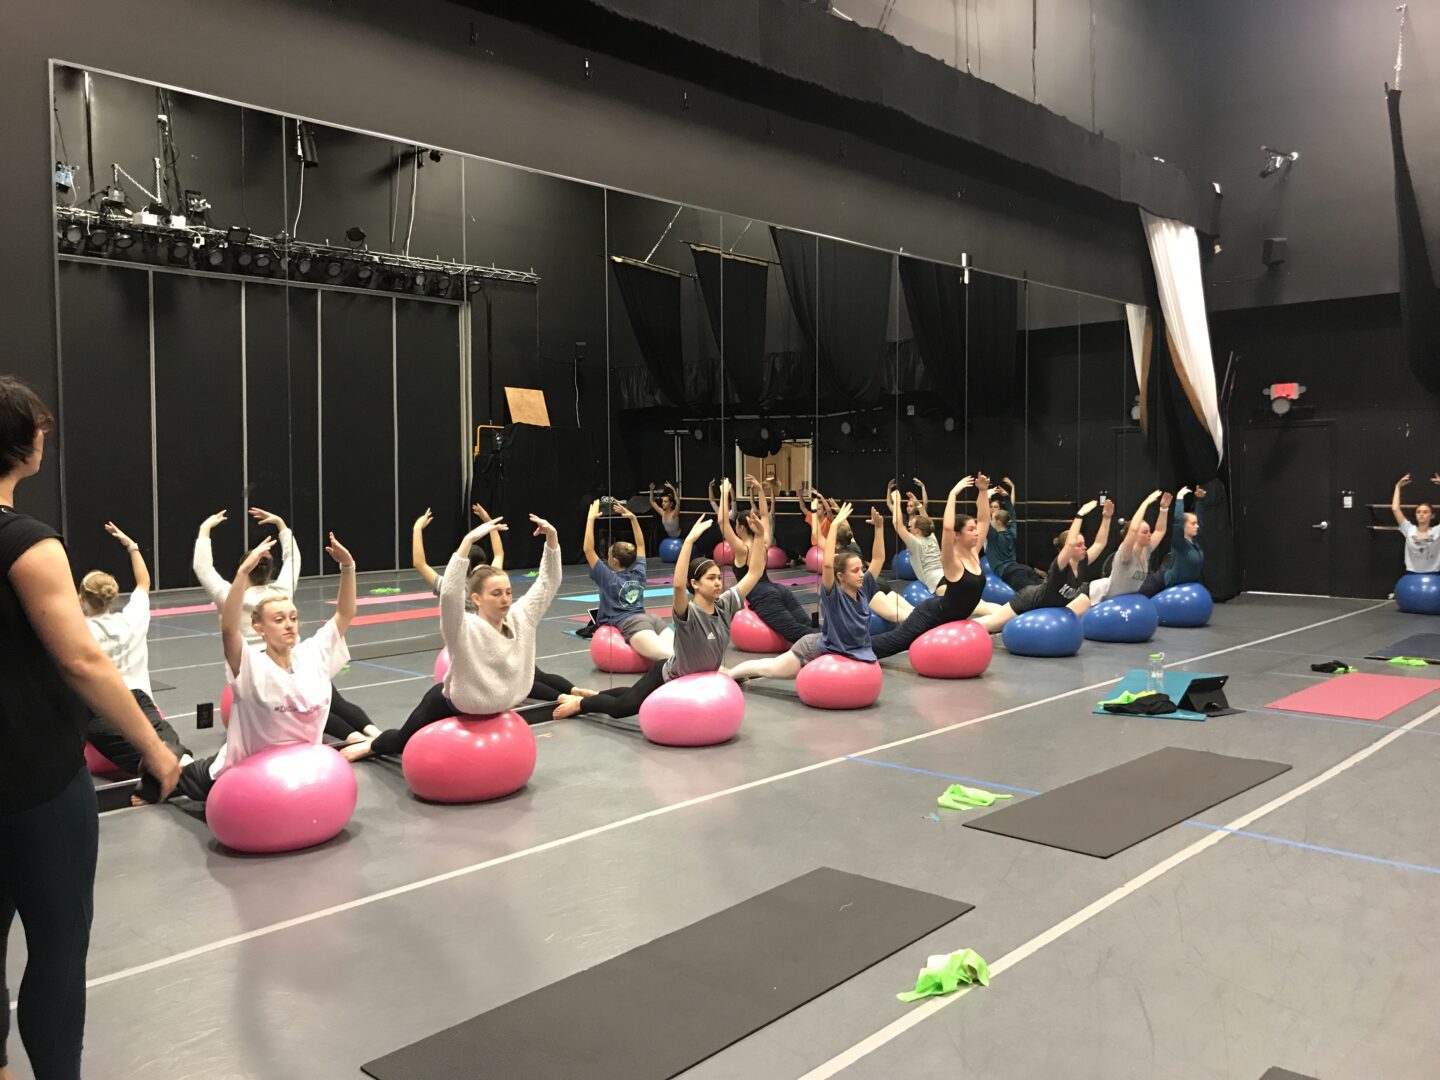 A group of people doing yoga in a gym.